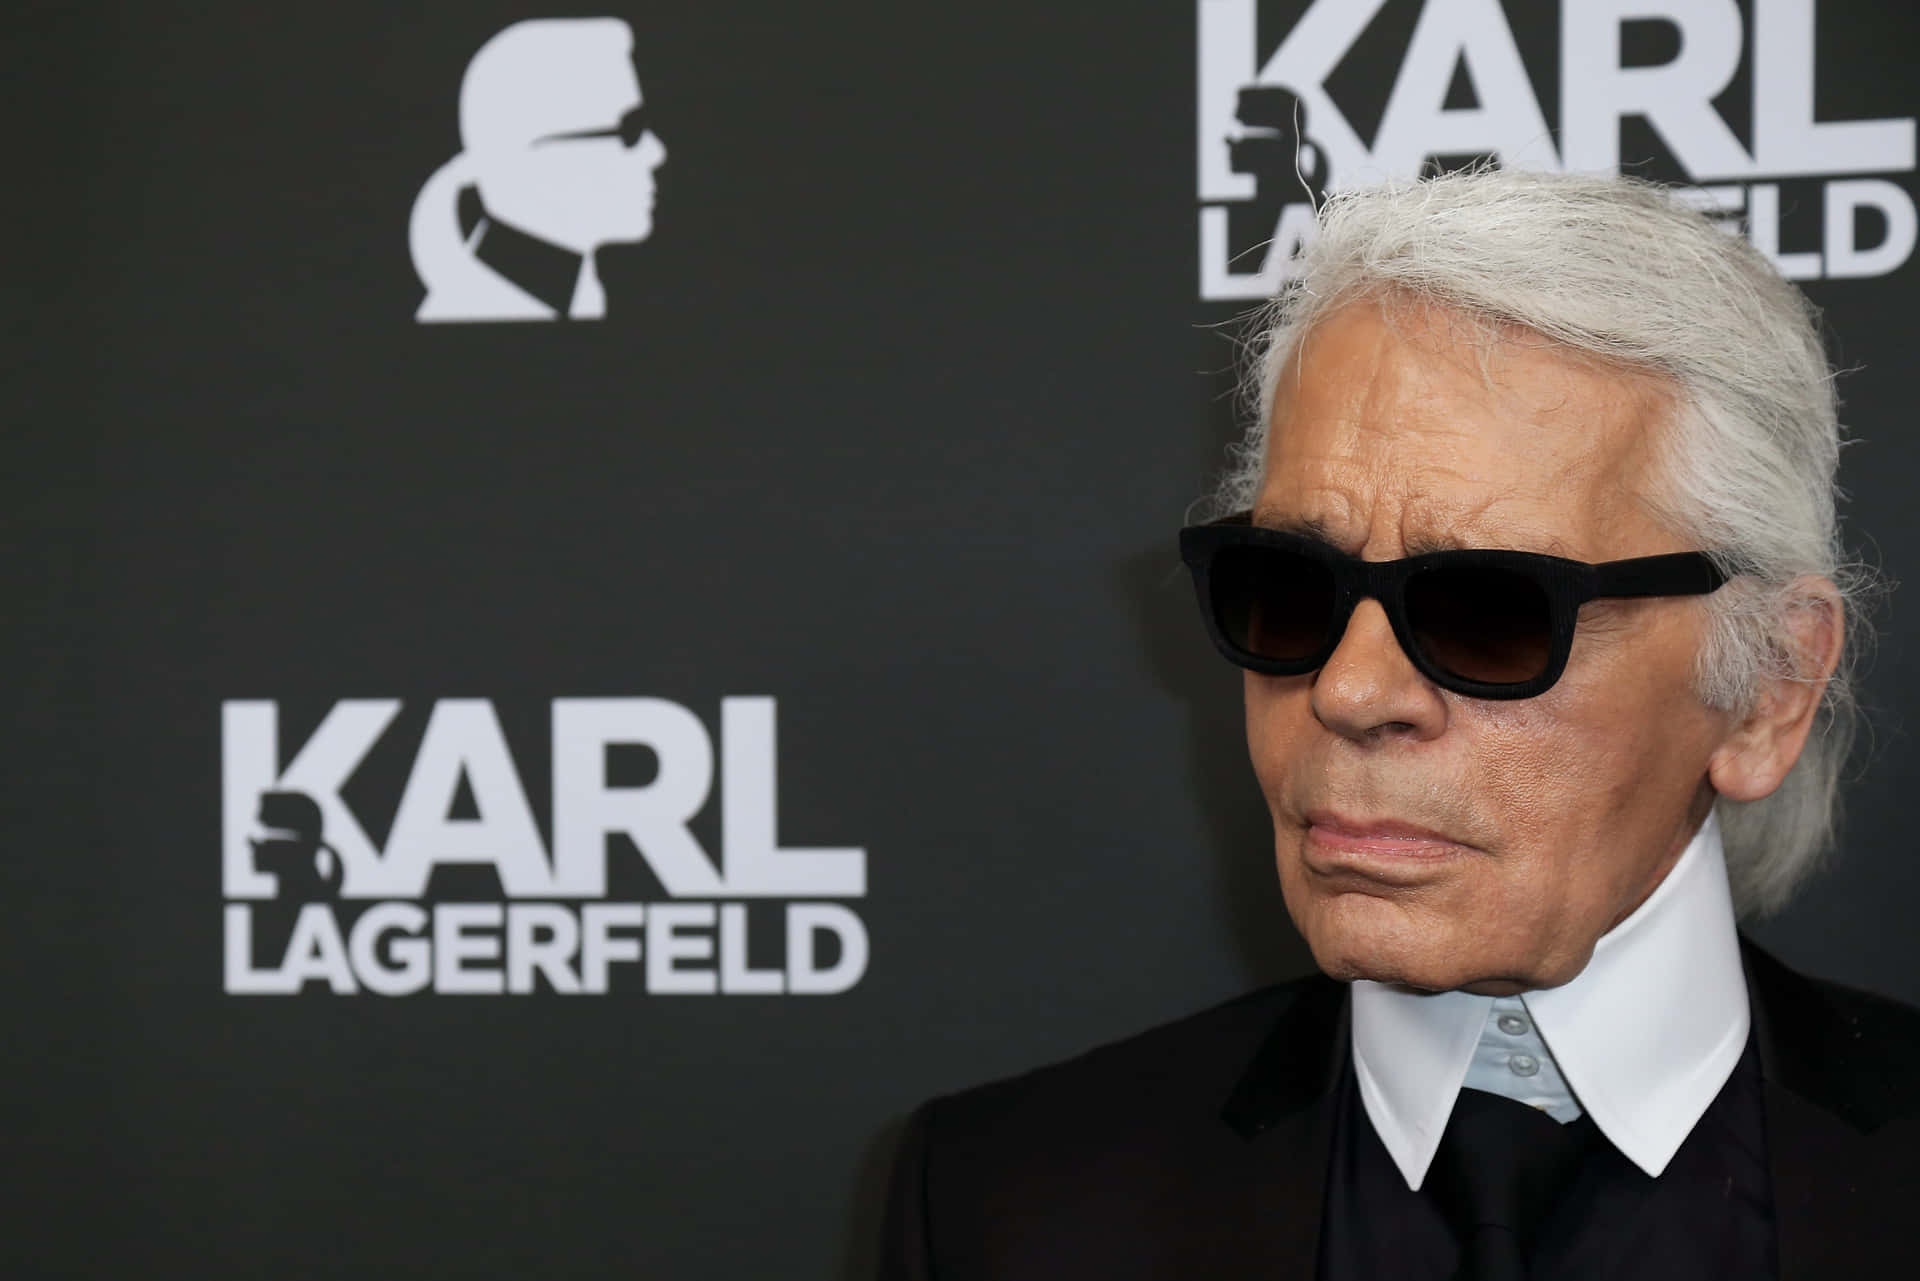 Karl Lagerfeld In Sunglasses At The Karl Lagerfeld Fashion Show Wallpaper